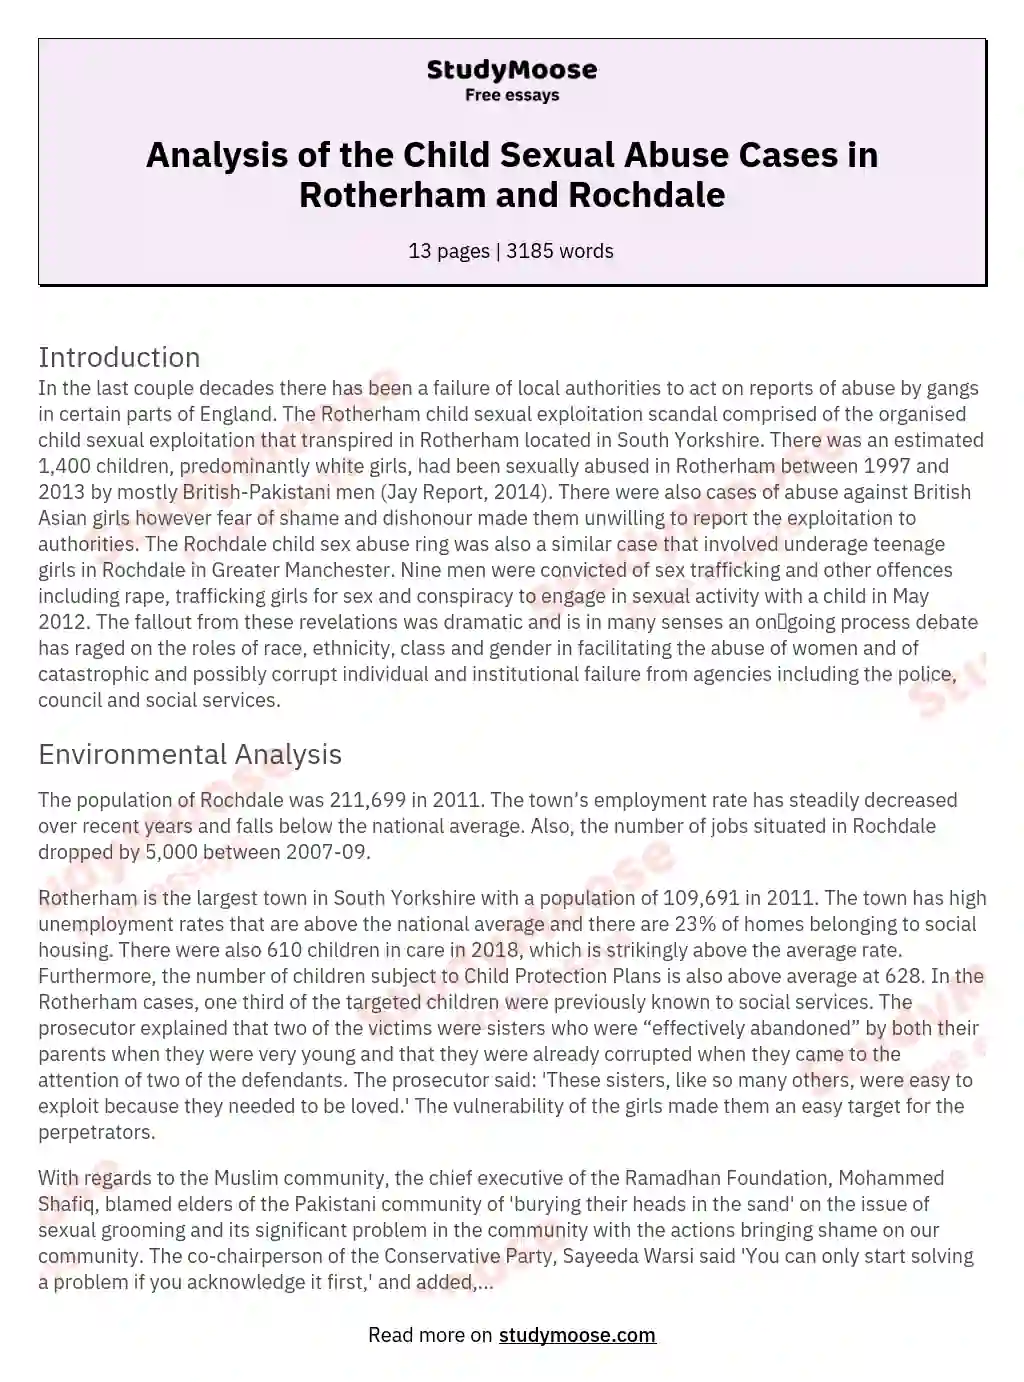 Analysis of the Child Sexual Abuse Cases in Rotherham and Rochdale